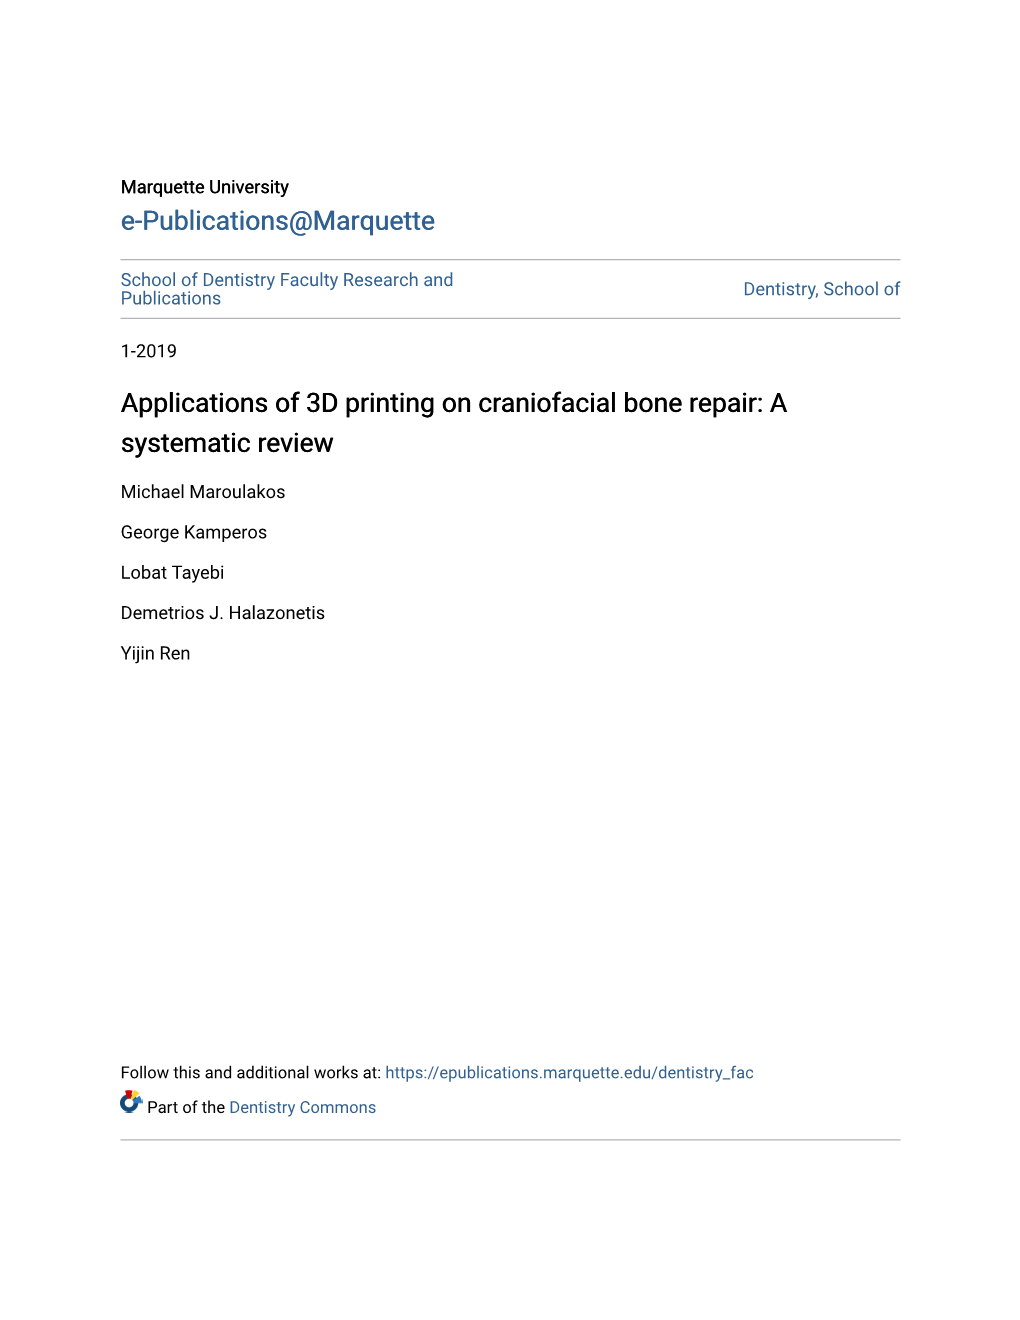 Applications of 3D Printing on Craniofacial Bone Repair: a Systematic Review